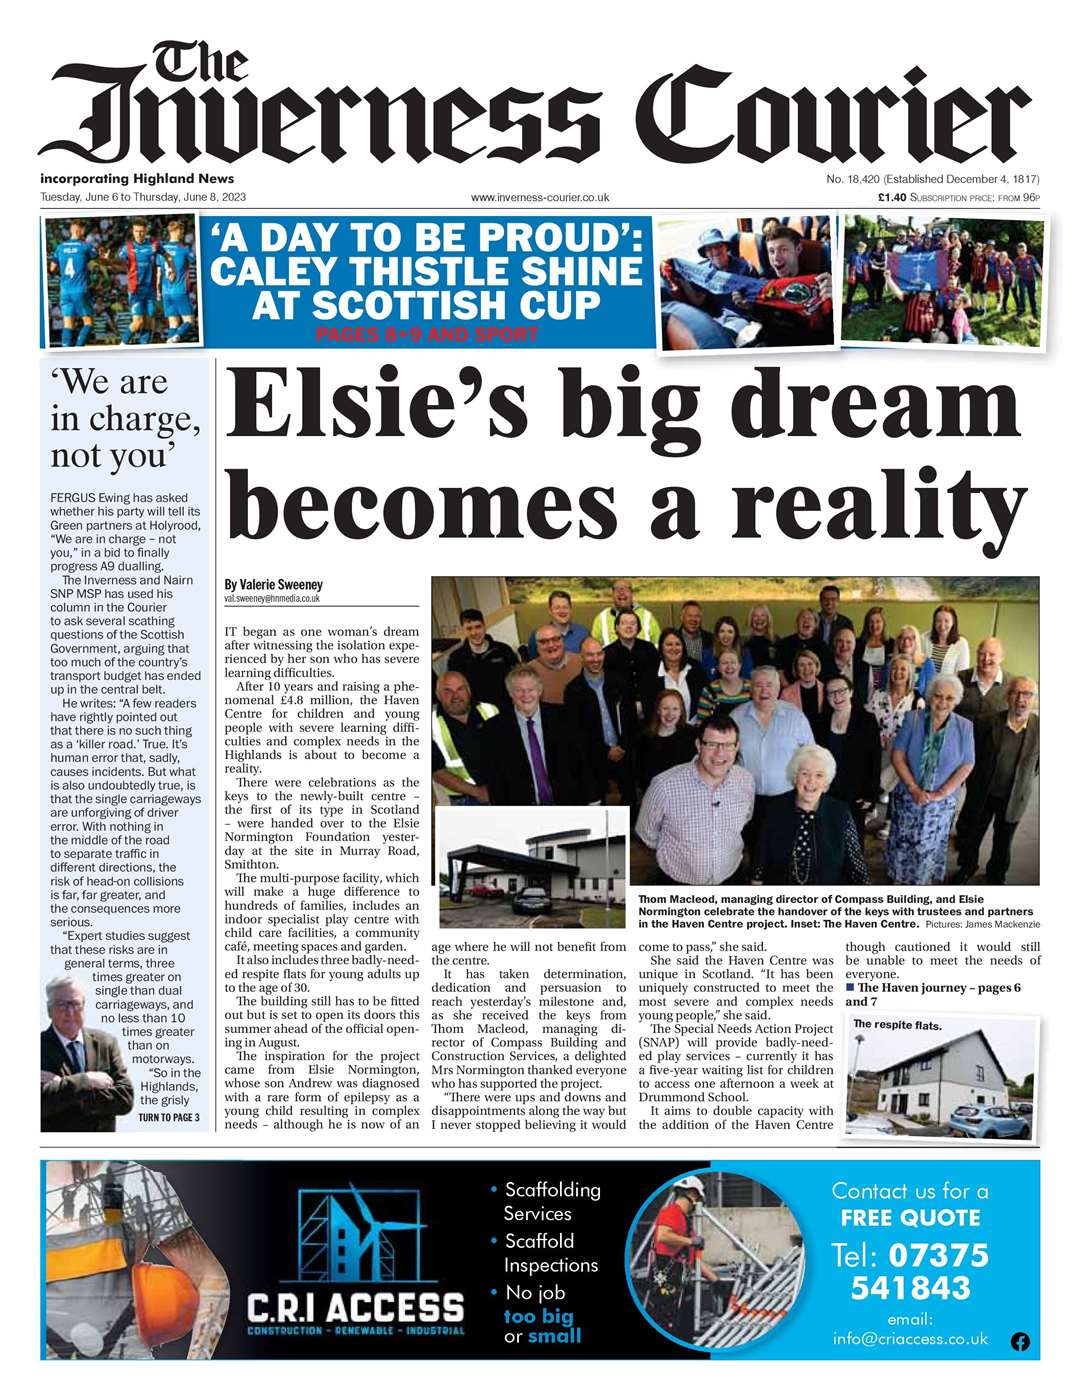 The Inverness Courier, June 6, front page.